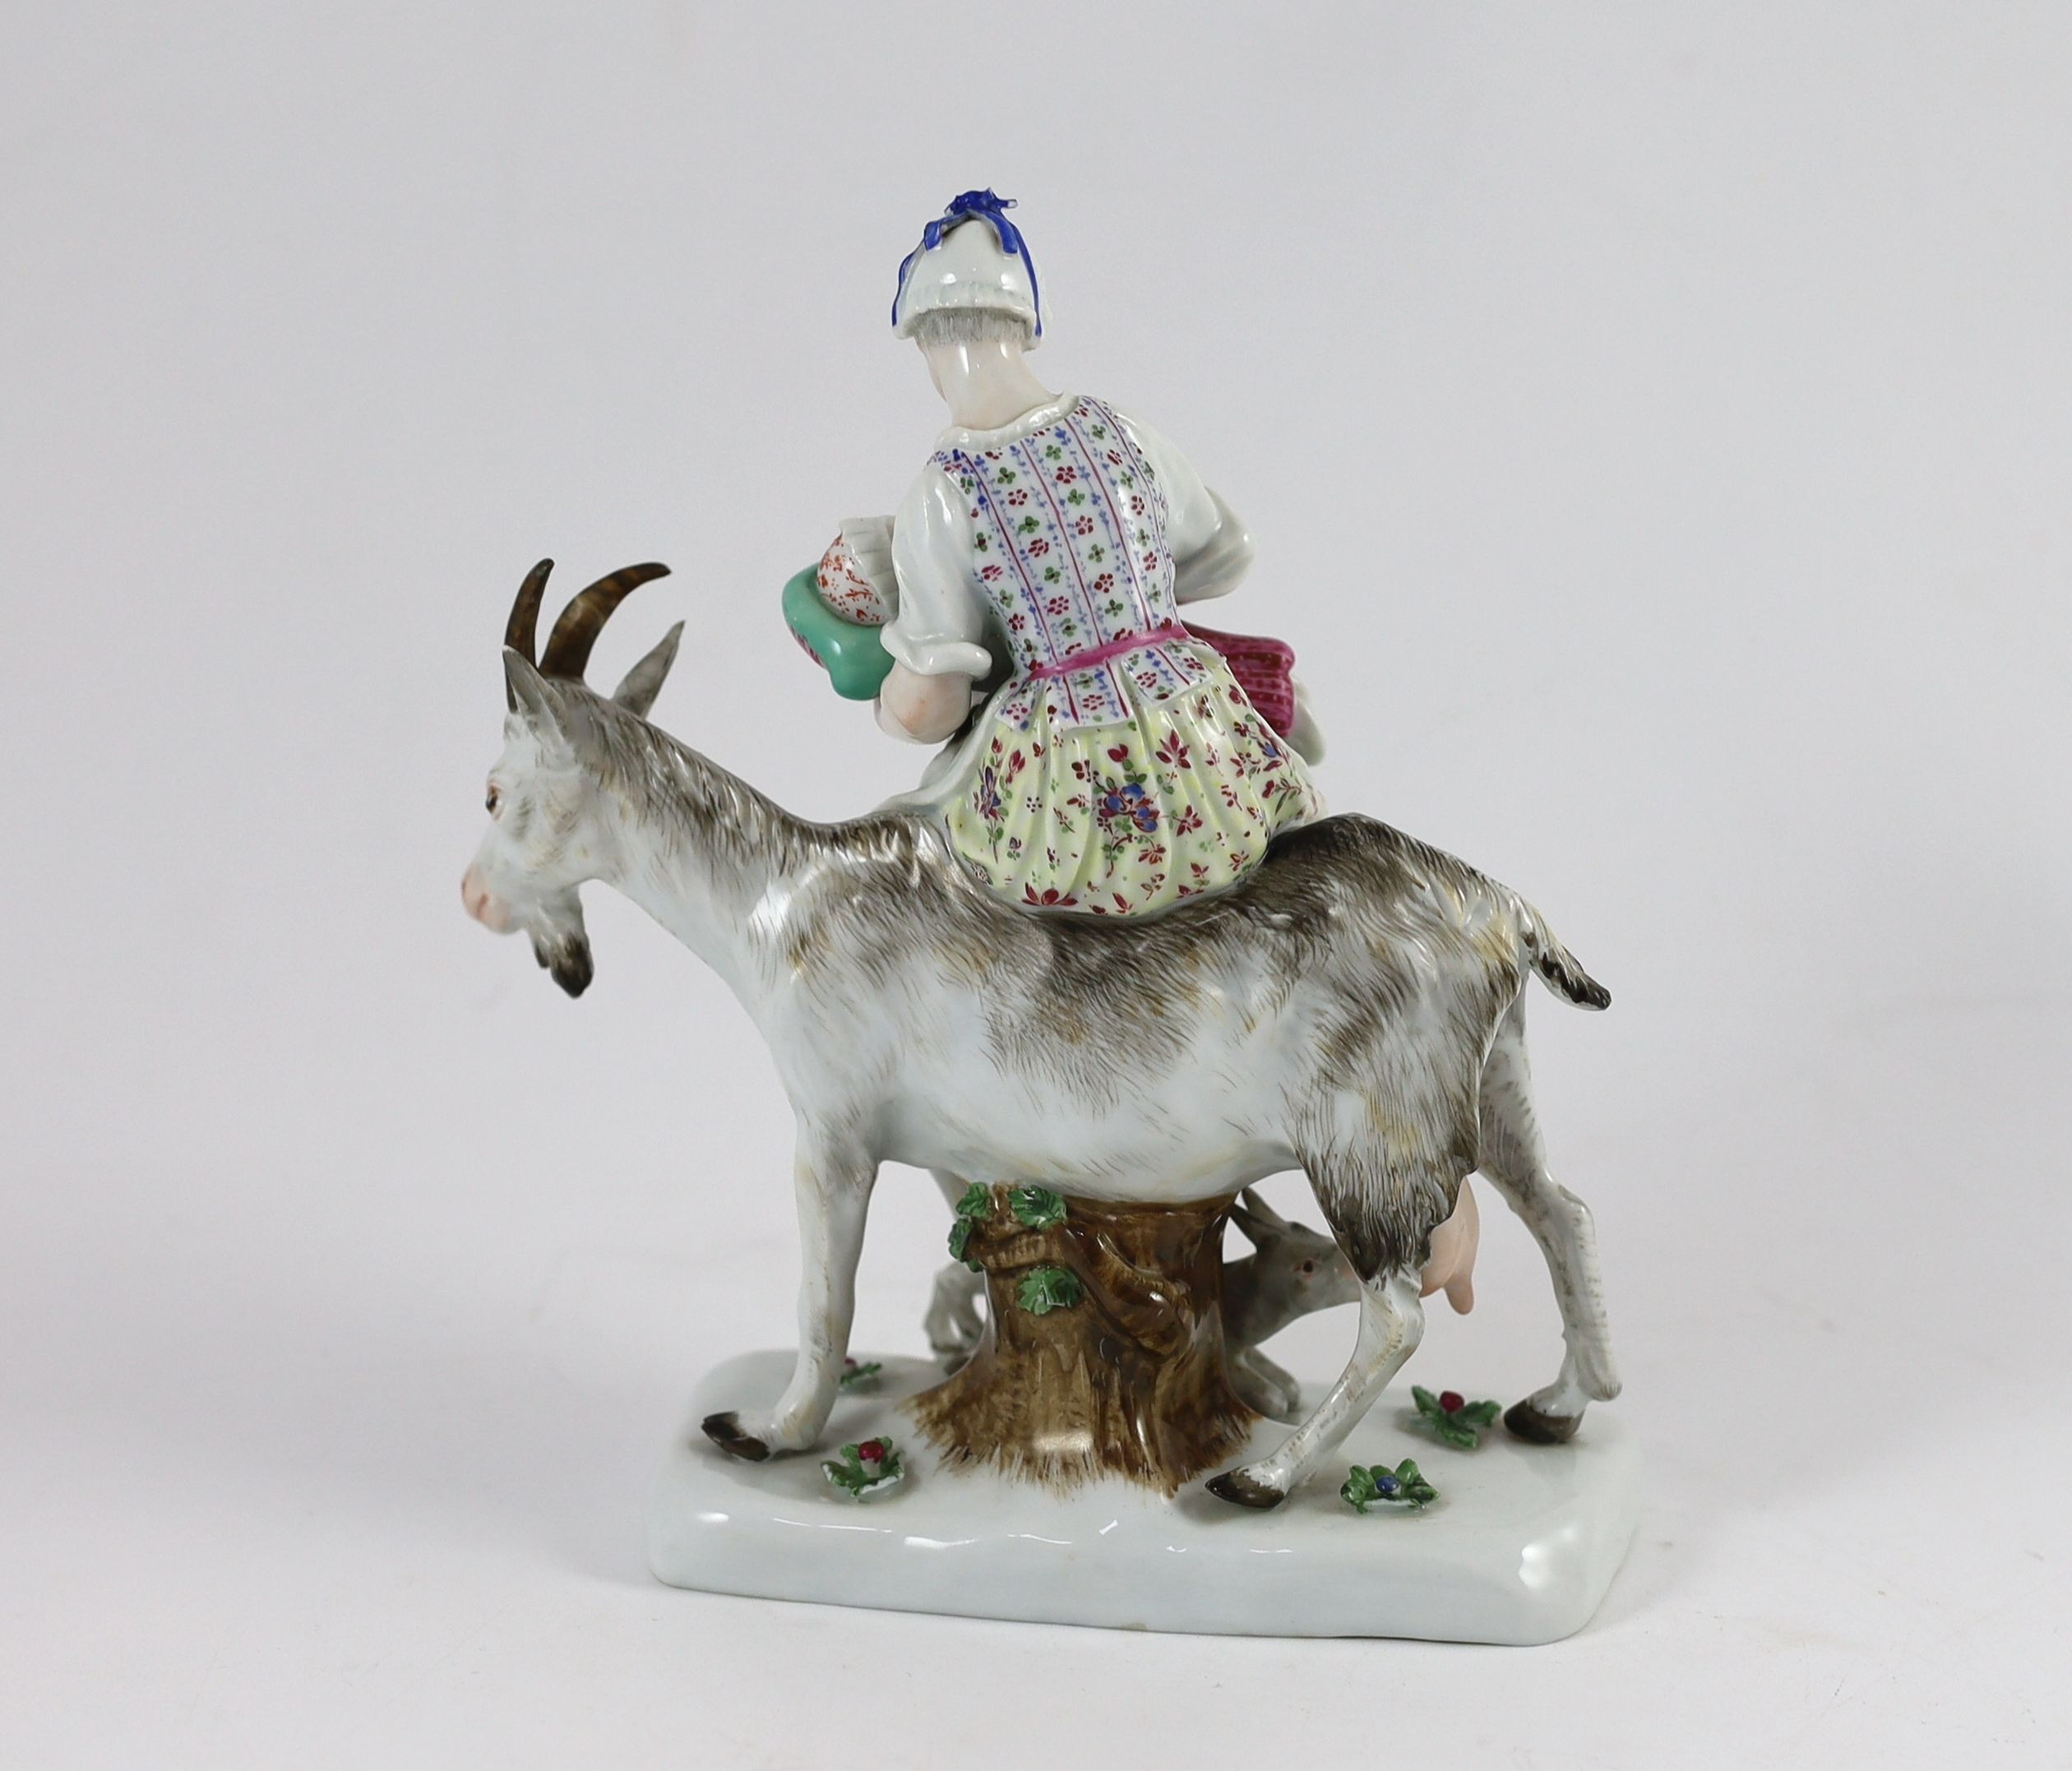 A Meissen group of the tailor’s wife riding a goat, 19th century, 18 cm high